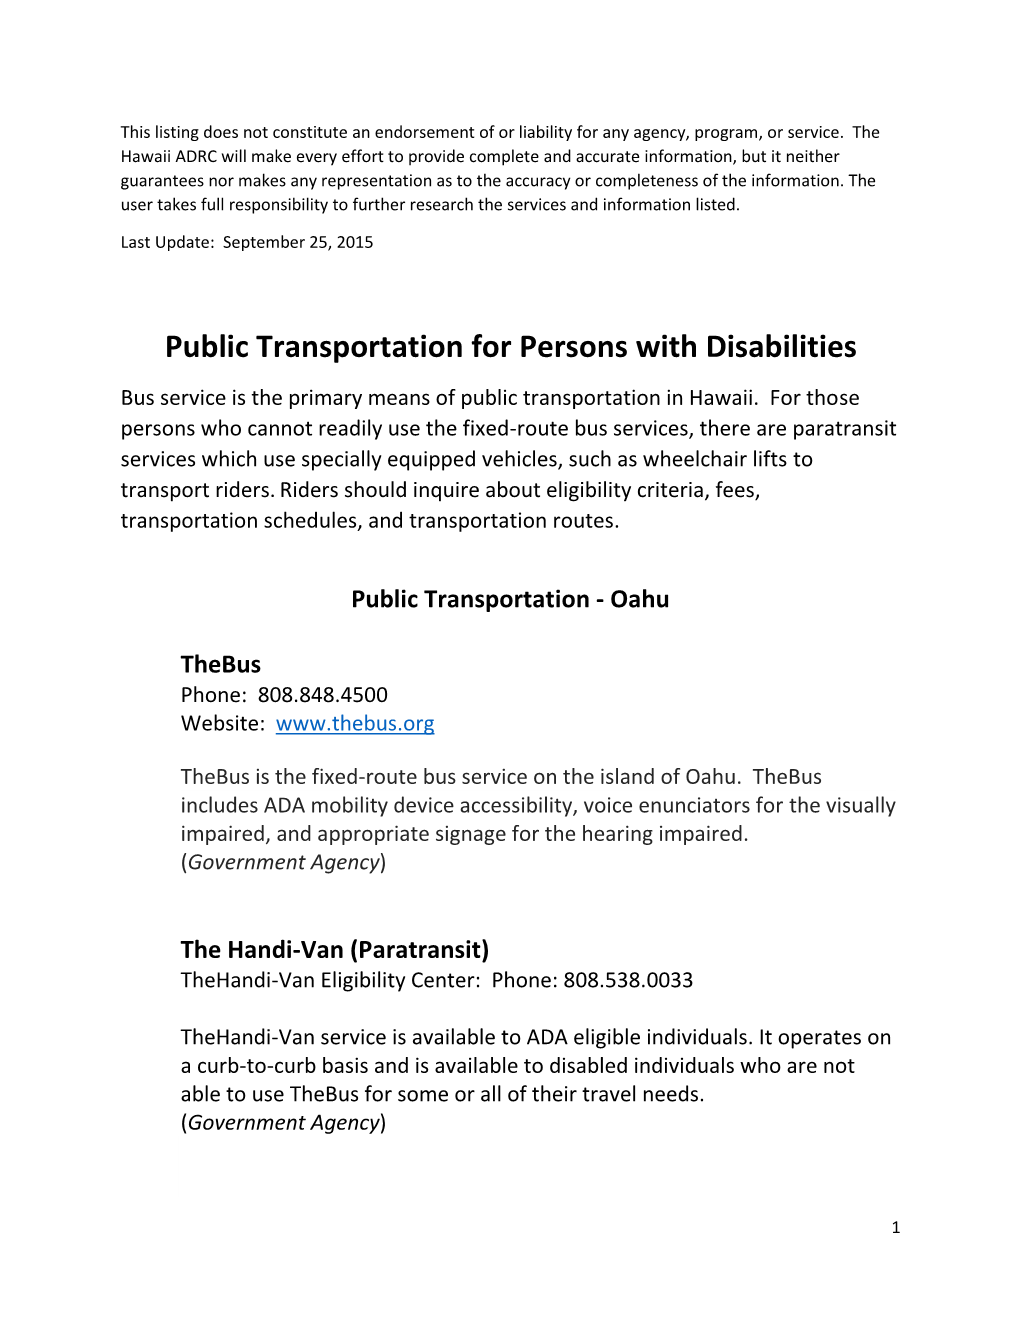 Public Transportation for Persons with Disabilities Bus Service Is the Primary Means of Public Transportation in Hawaii